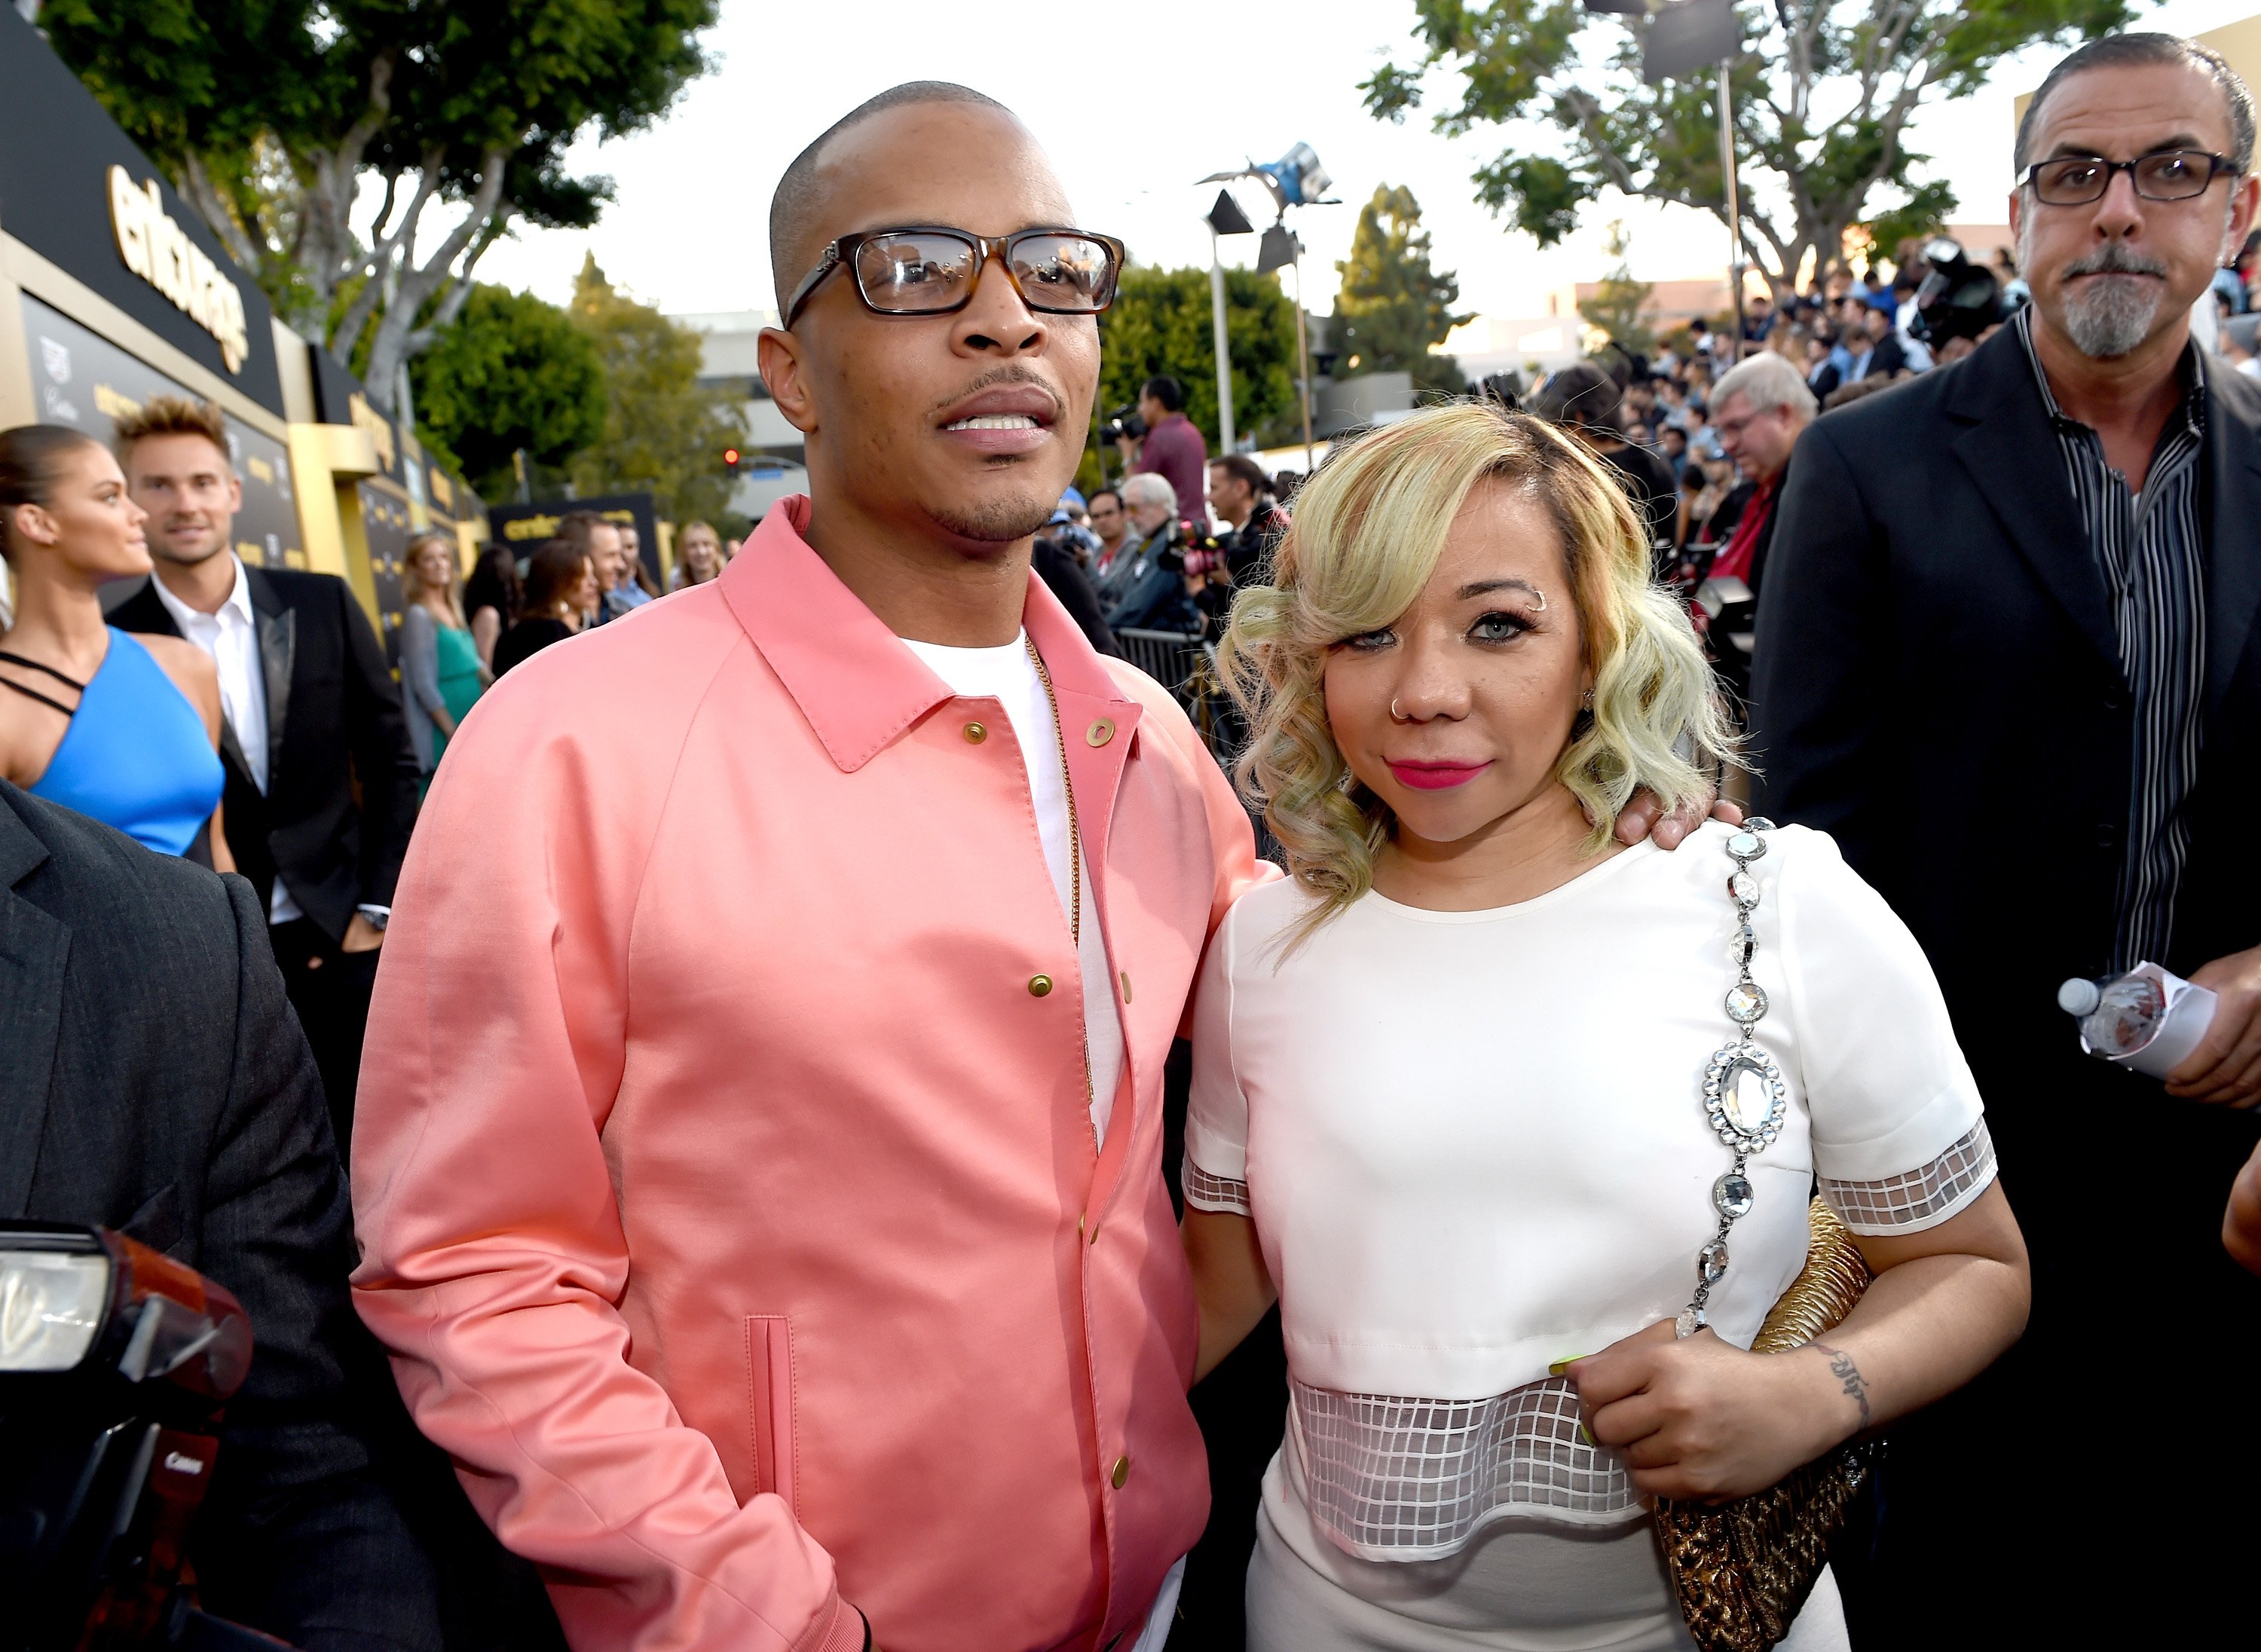 T.I. and Tameka Cottle attend the premiere of Warner Bros. Pictures' "Entourage" at Regency Village Theatre on June 1, 2015 | Photo: GettyImages